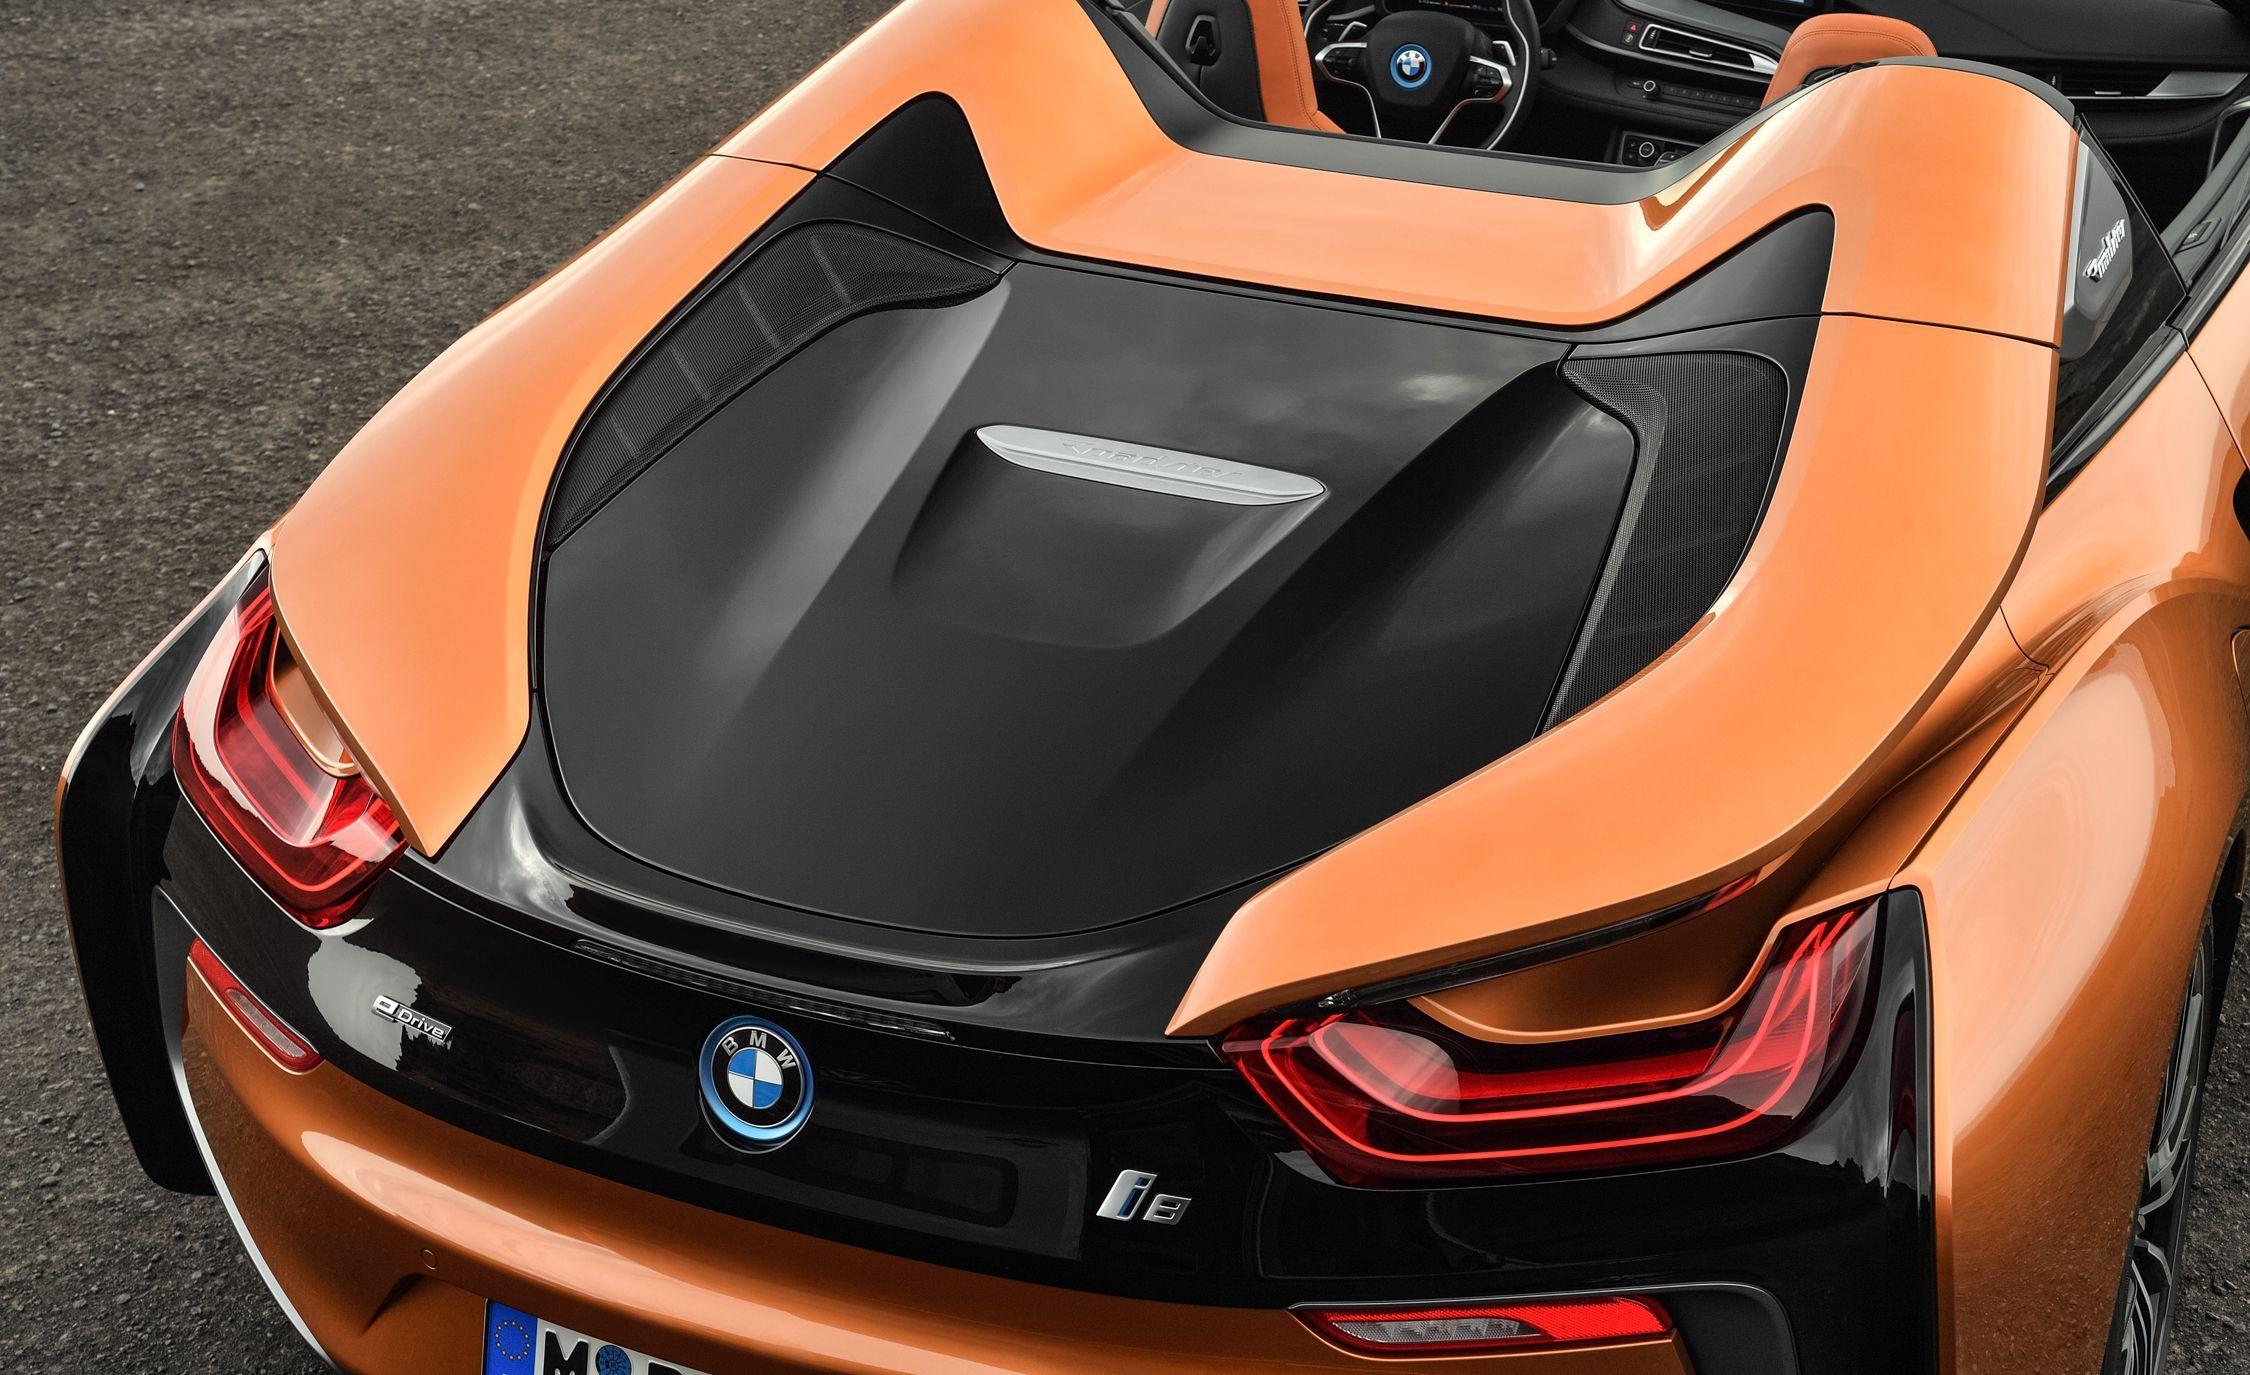 BMW i8 Reviews. BMW i8 Price, Photo, and Specs. Car and Driver